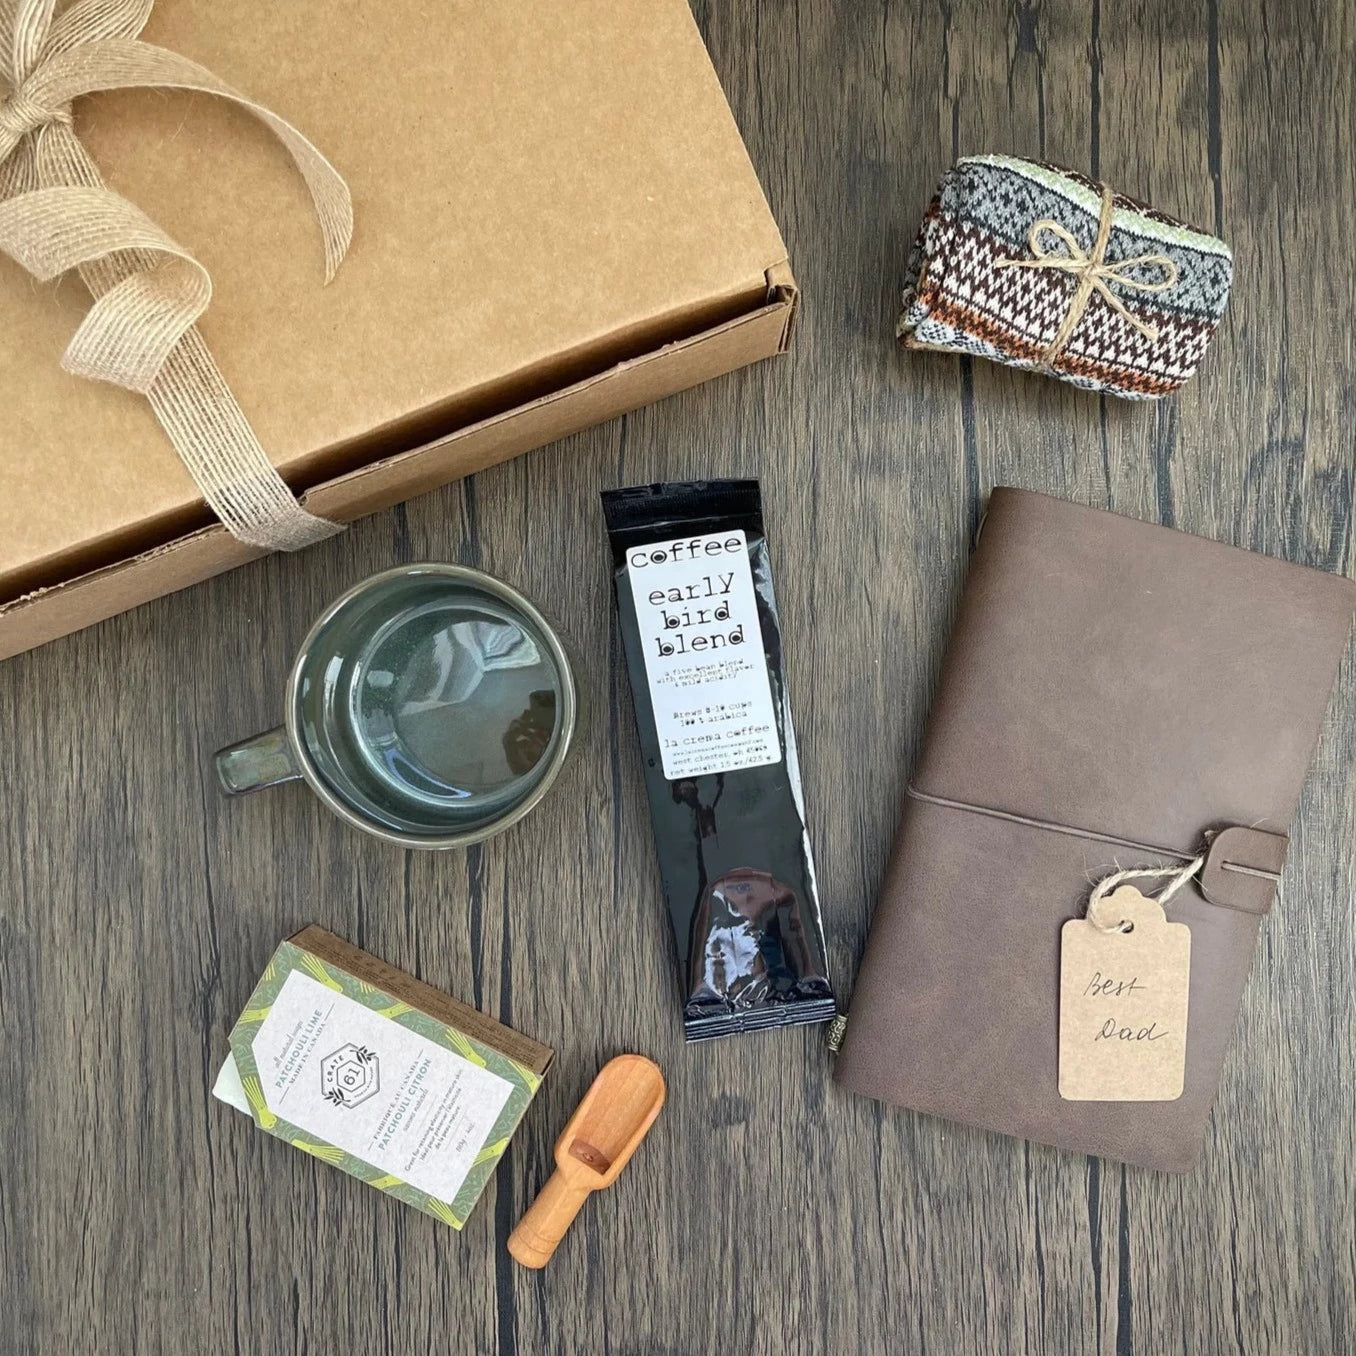 Shop by Gift Baskets for Men // Manly Man Co® - Manly Man Co.